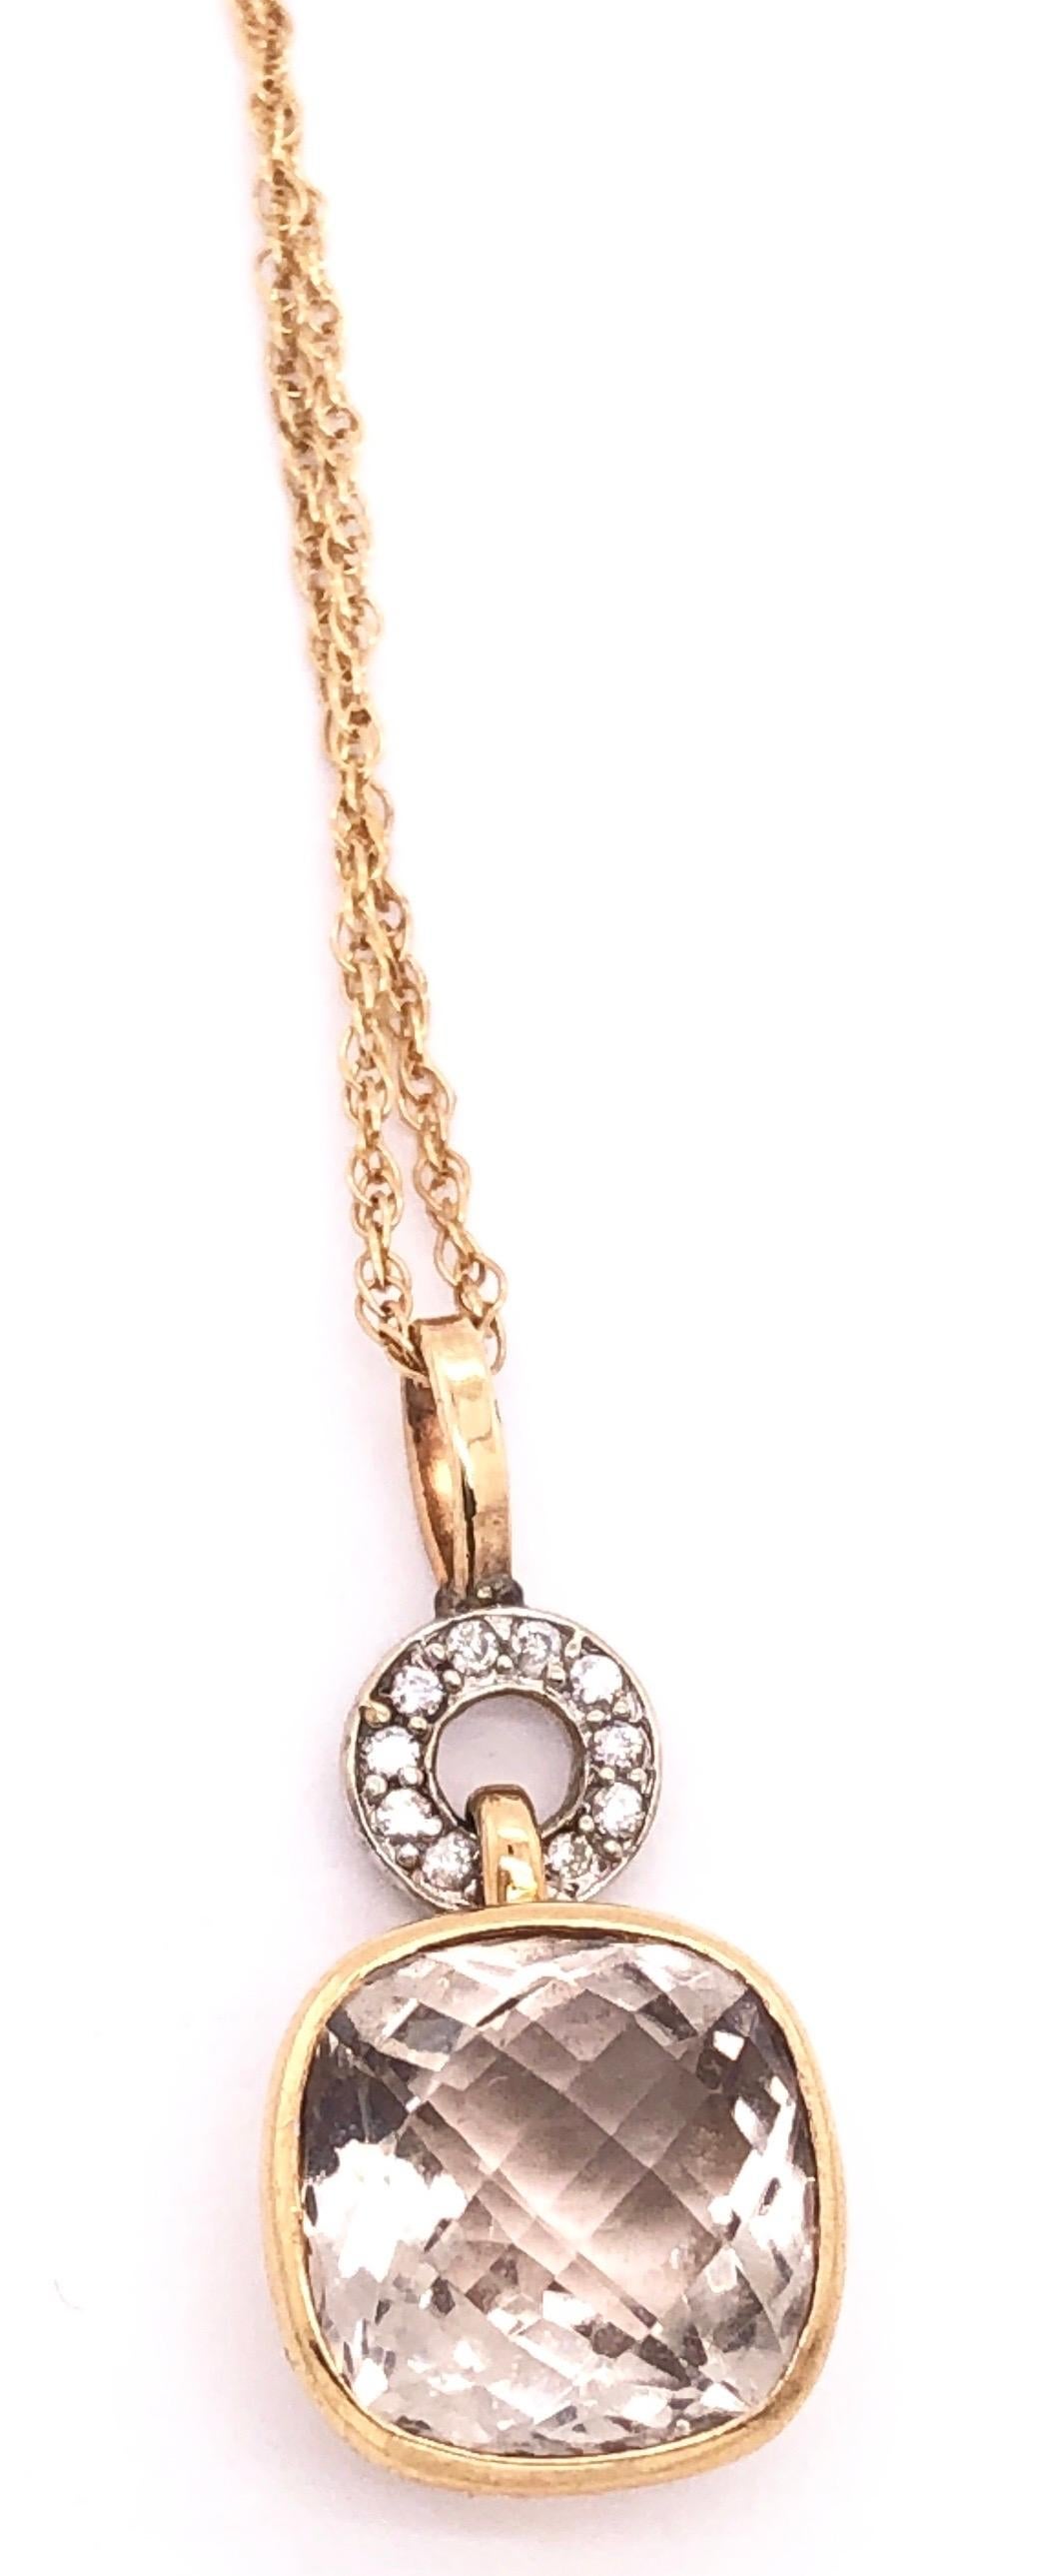 Modern 14 Karat Gold Necklace with Round Sapphire and Diamond Pendant For Sale